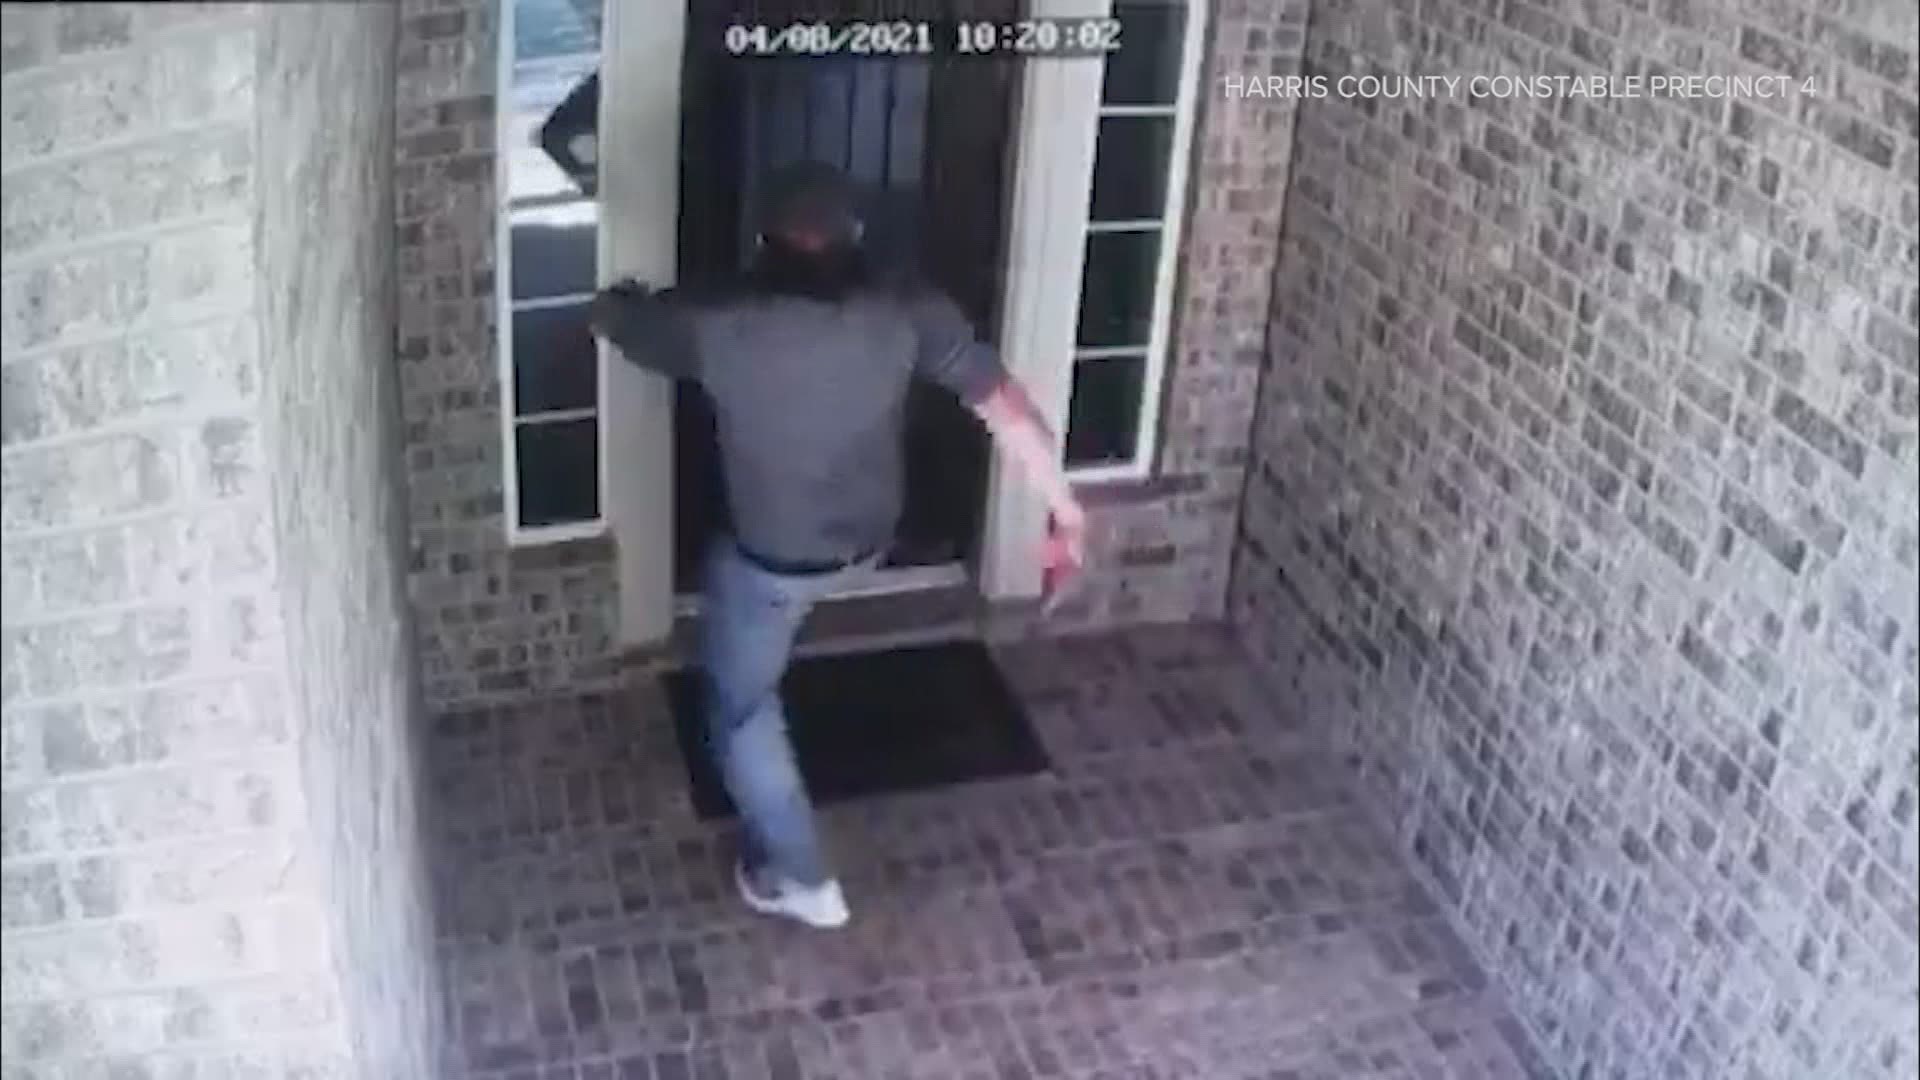 Investigators are hoping someone will recognize the burglary suspect who was caught on camera kicking the front door in and sneaking into an Atacocita home.